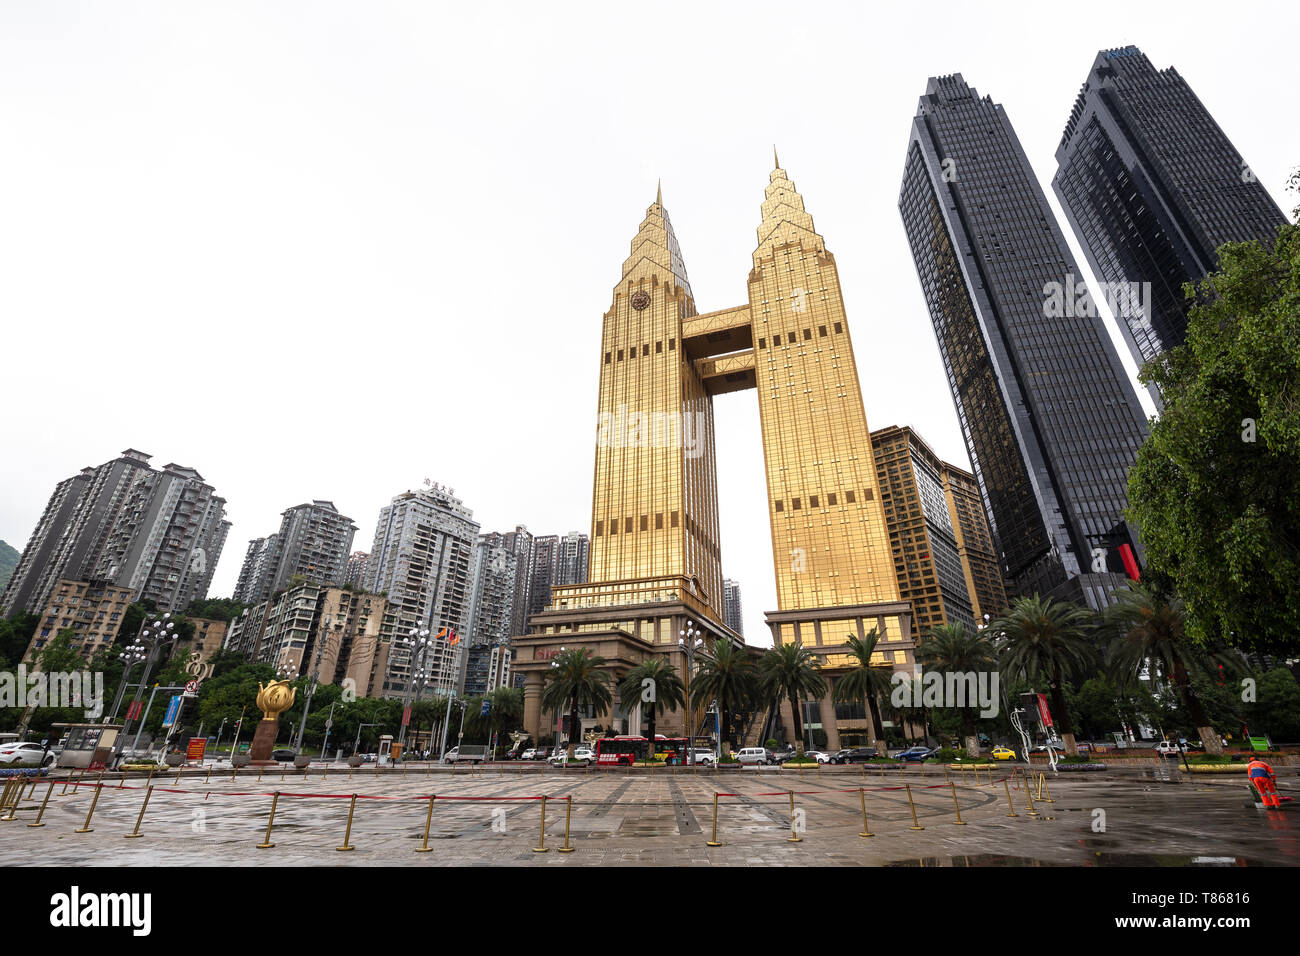 chonqging,china - may,22,2018:The chongqing shangrila hotel is one of the landmark in the city. Stock Photo